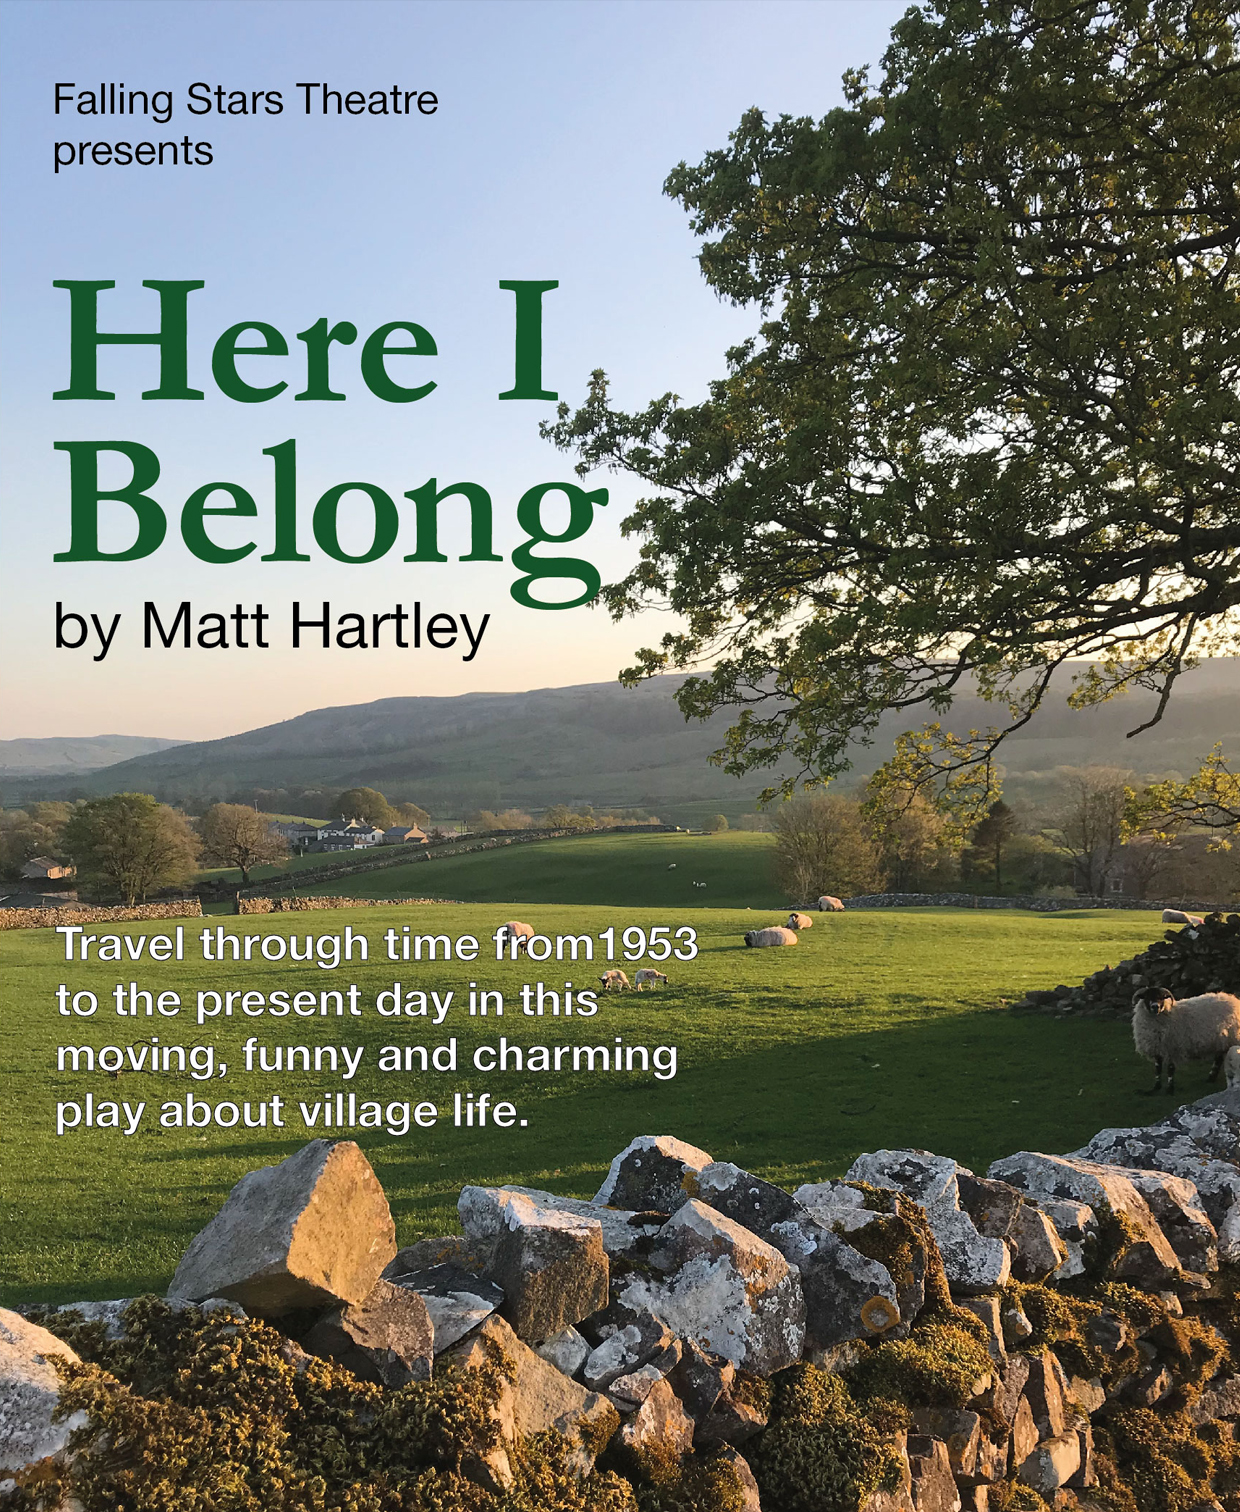 'Here I Belong' by Matt Hartley, Performed by Falling Stars Theatre. Travel through time from 1953 to the present day in this moving, funny and charming play about Village Life.